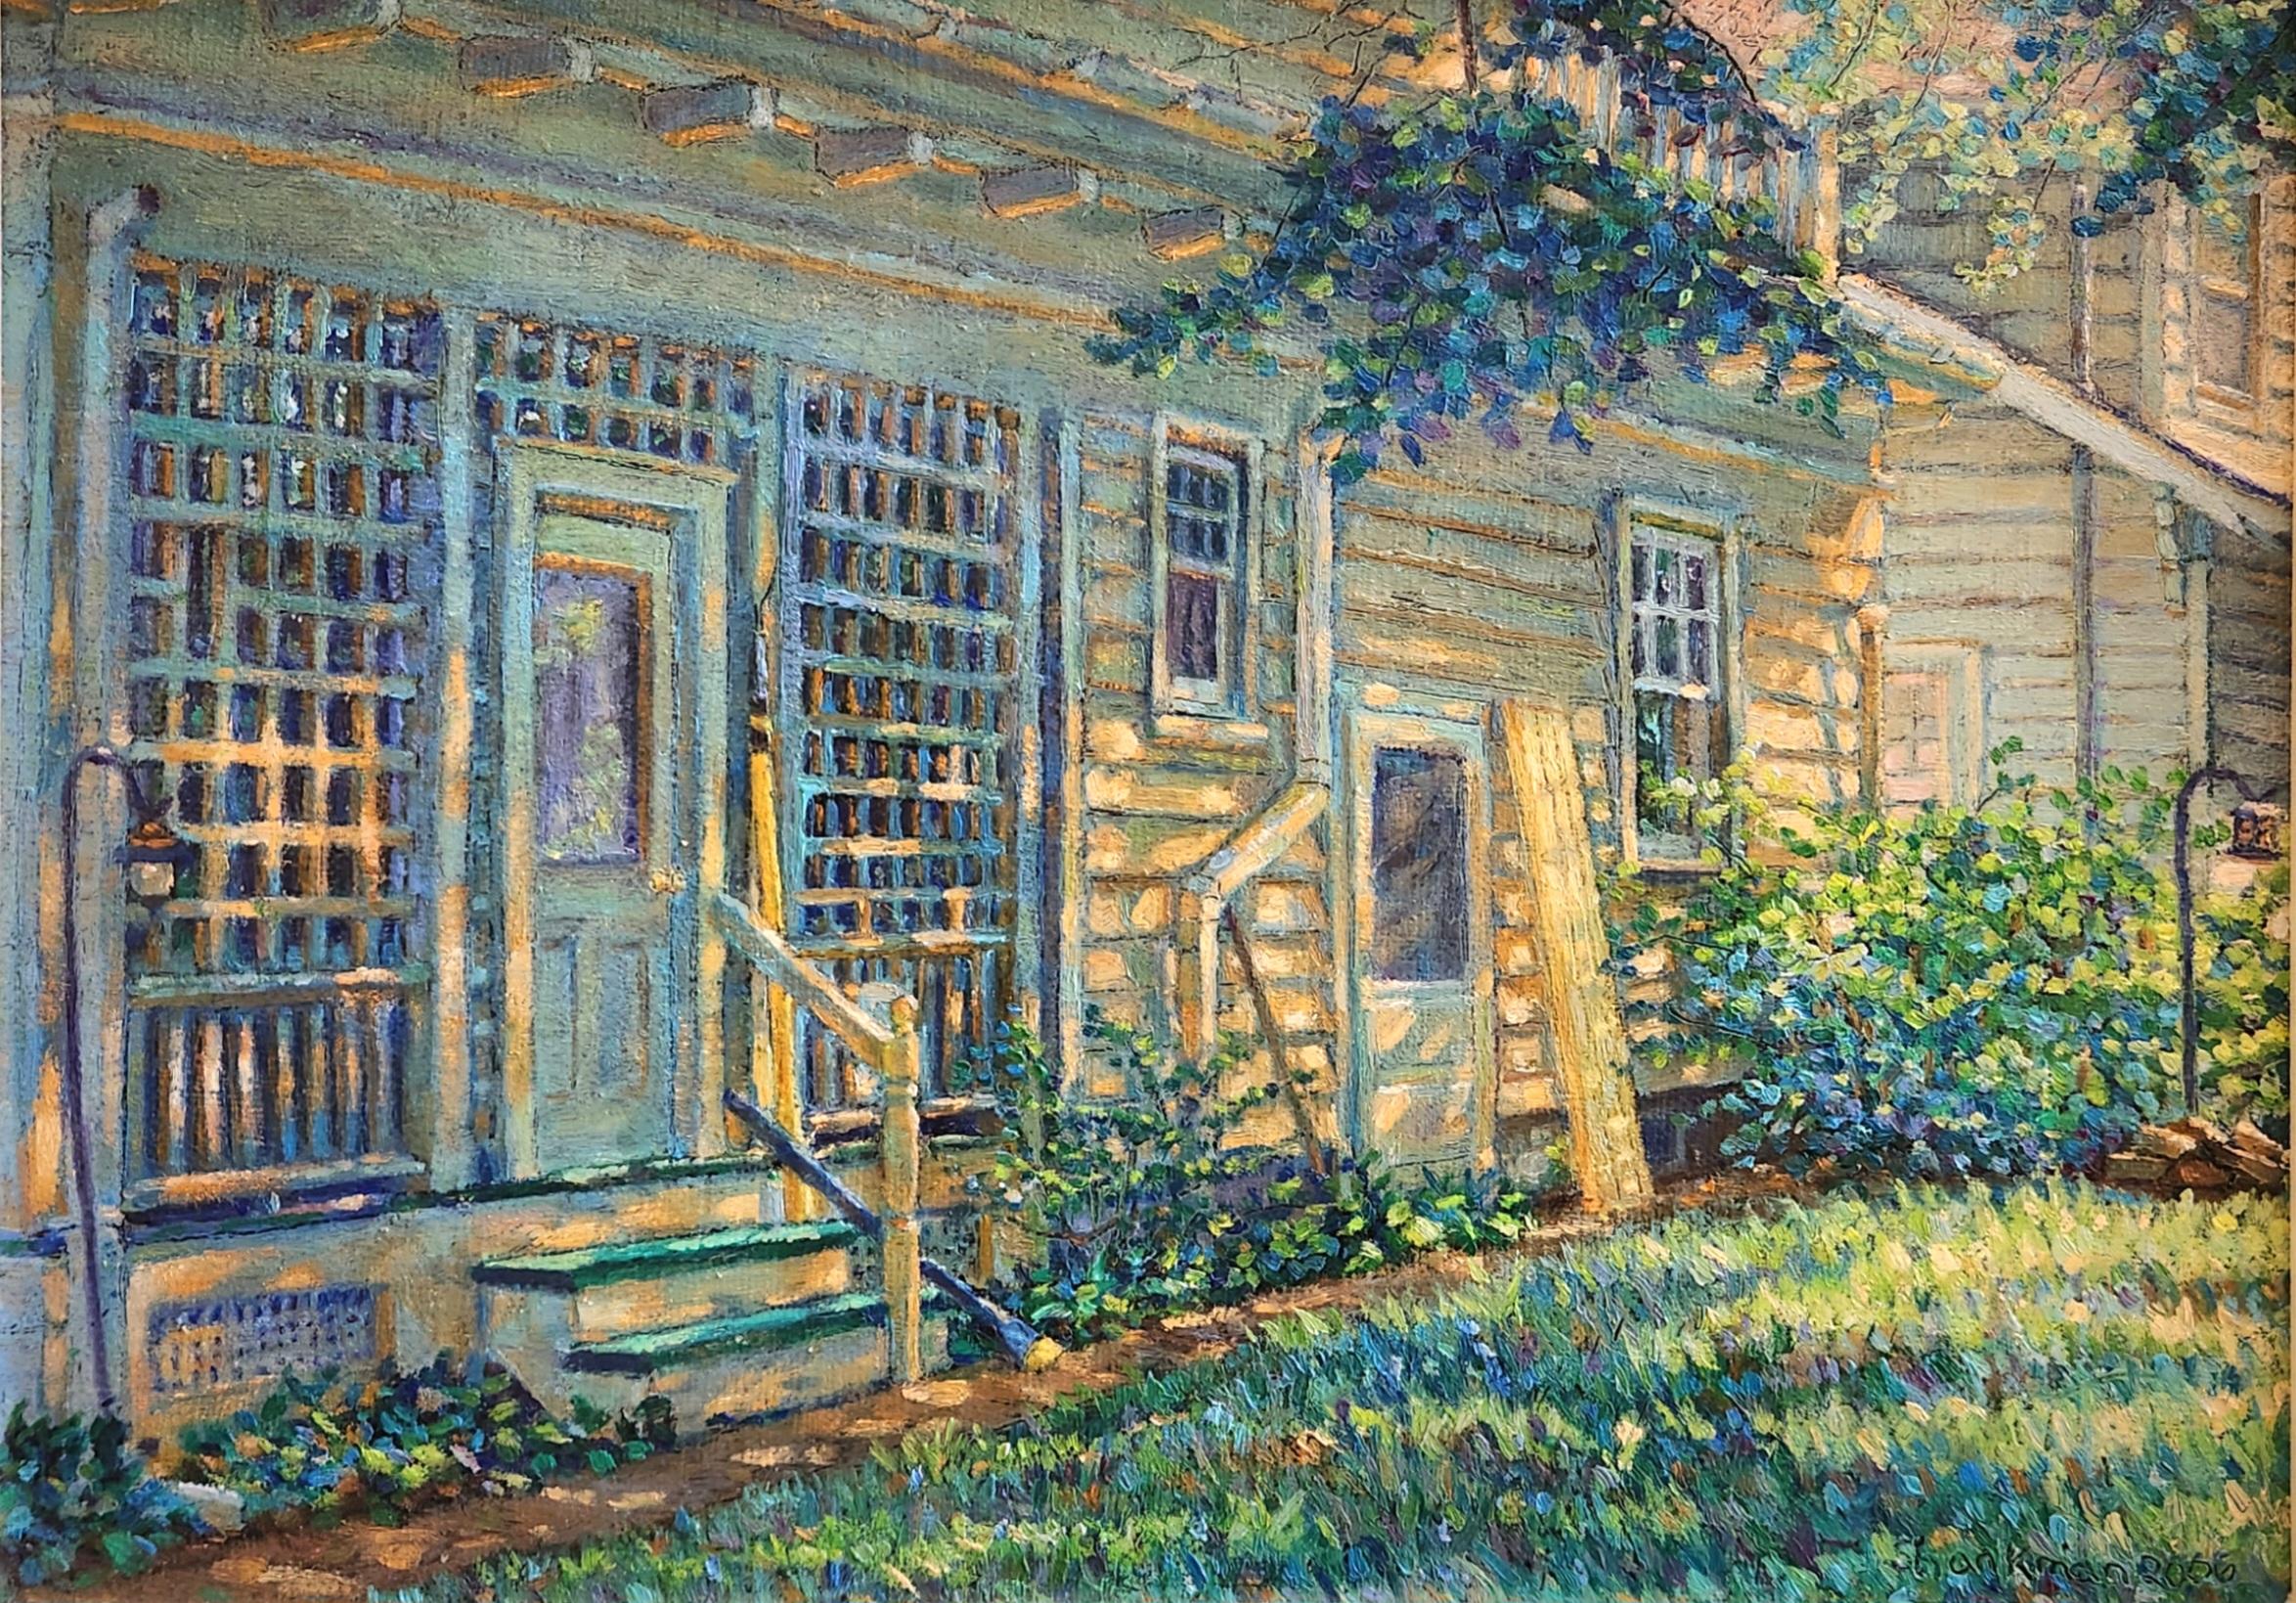 This oil painting on linen shows the entrance and porch of an older house in Upstate New York's Albany,  It underscores the masterful handling of light by the artist. Sunshine is dappled across the front of the house as it comes through the trees,